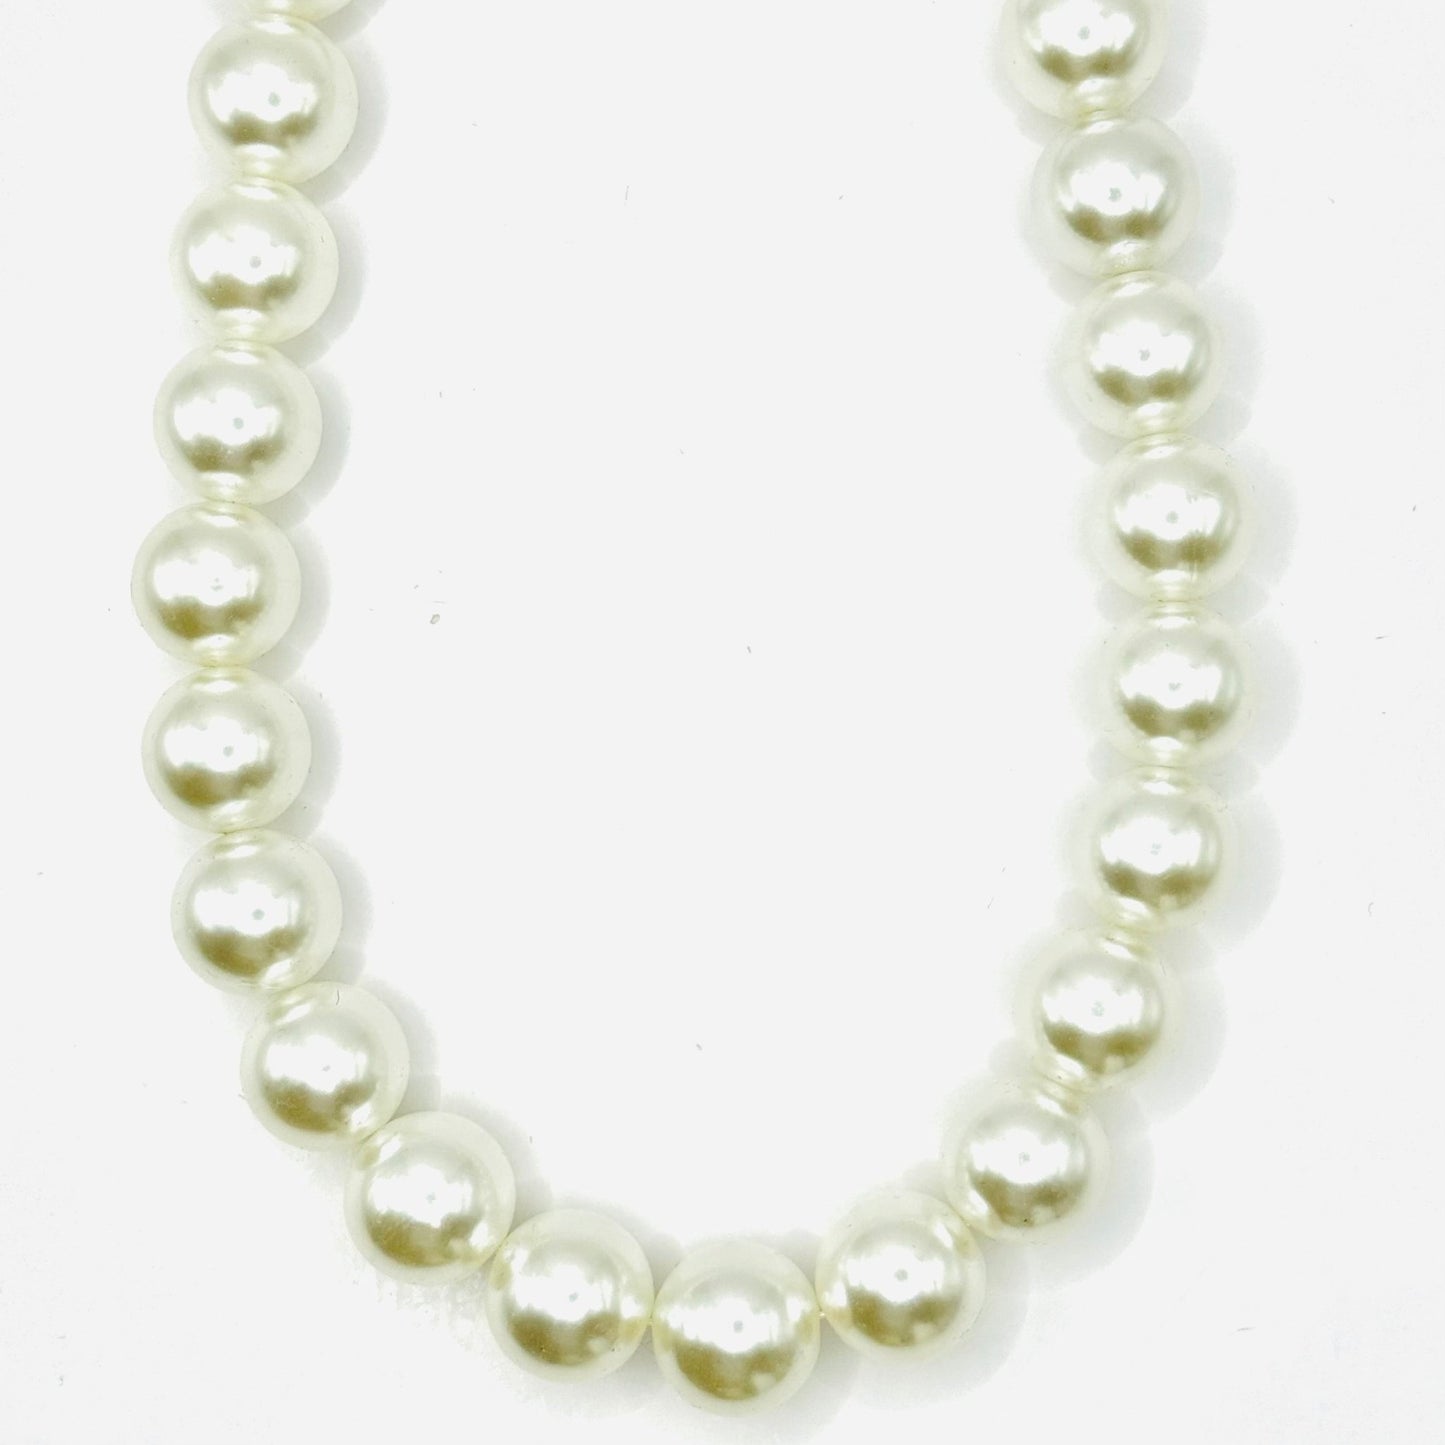 Pearls For The Girls Accessories - House of FaSHUN by Shun Melson